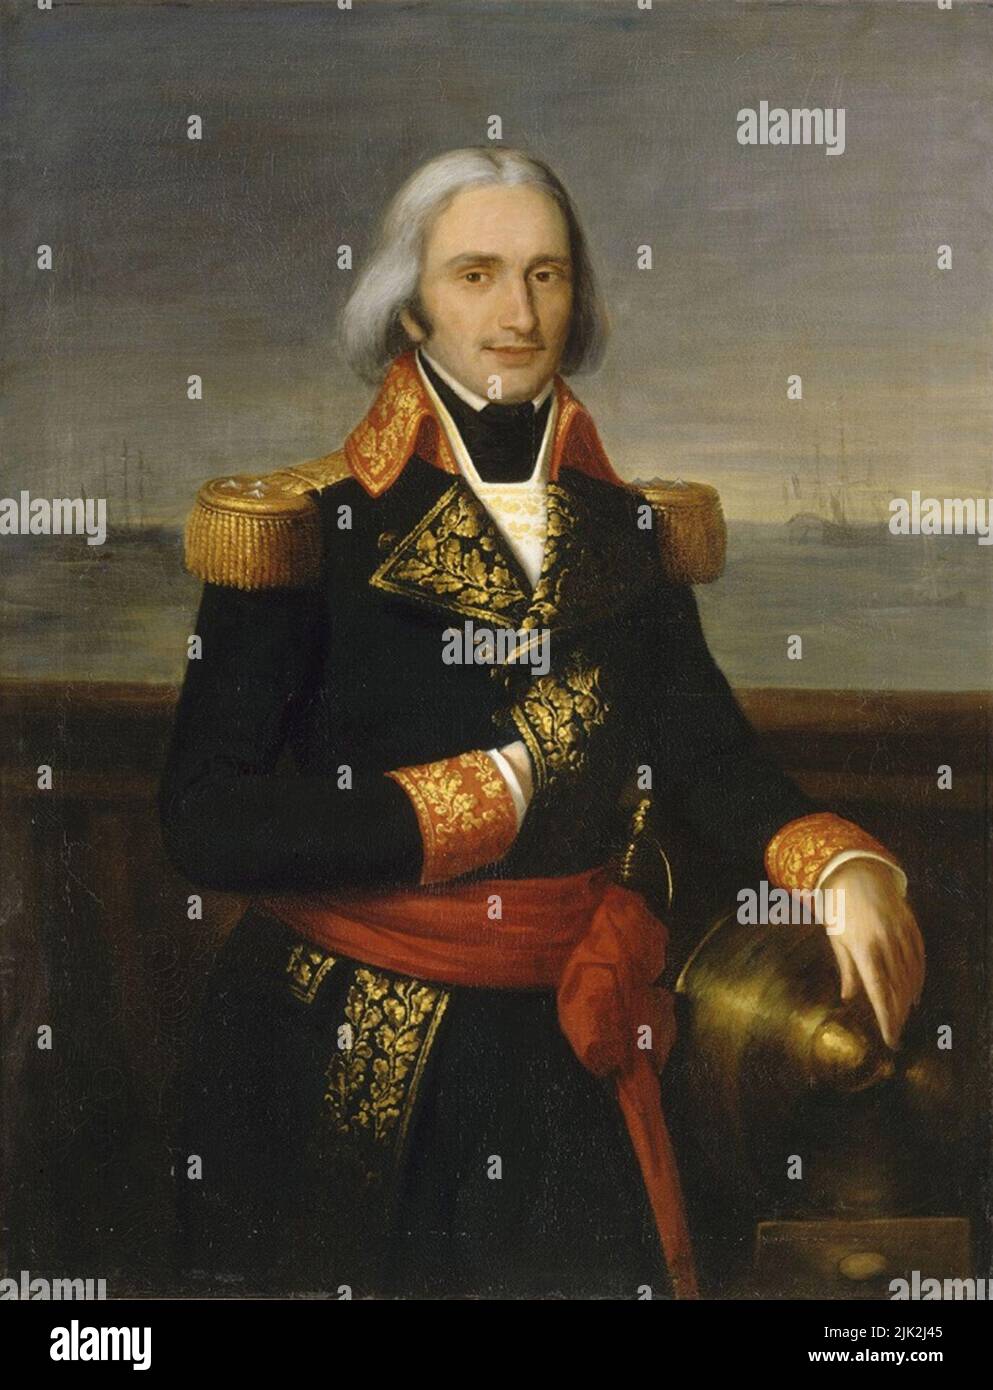 The French admiral François-Paul Brueys d'Aigalliers who led the Mediterranean fleet until he died at The Battle of the Nile Stock Photo